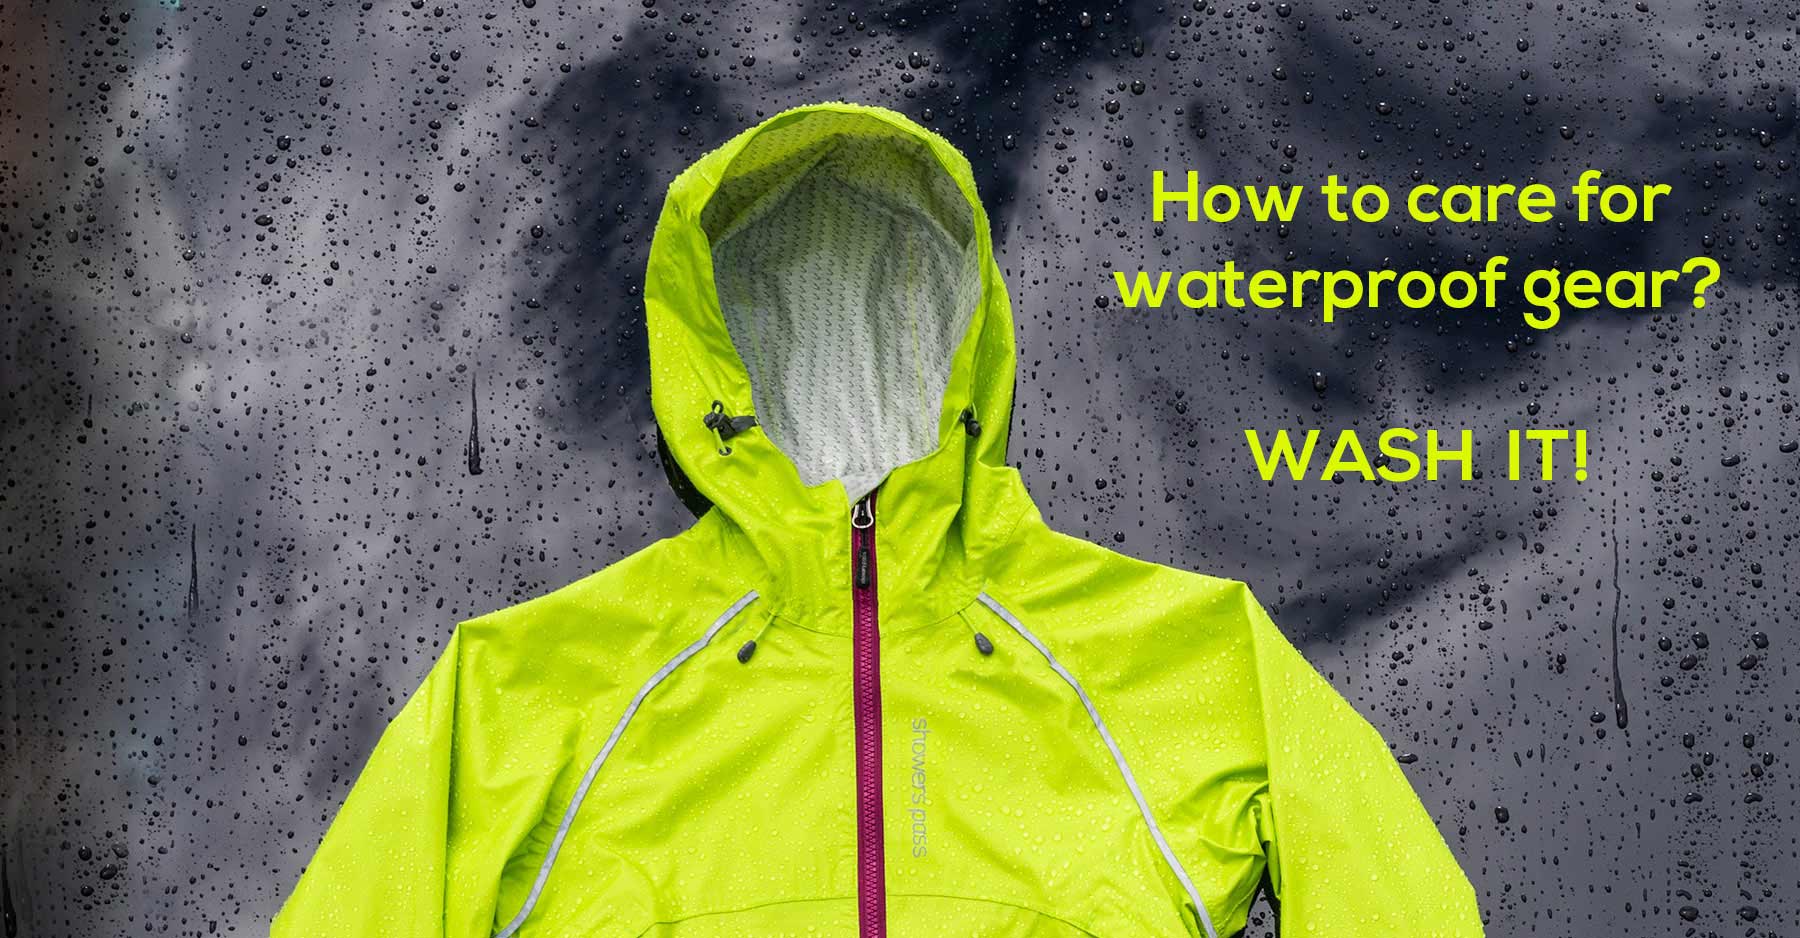 How to Waterproof a Jacket